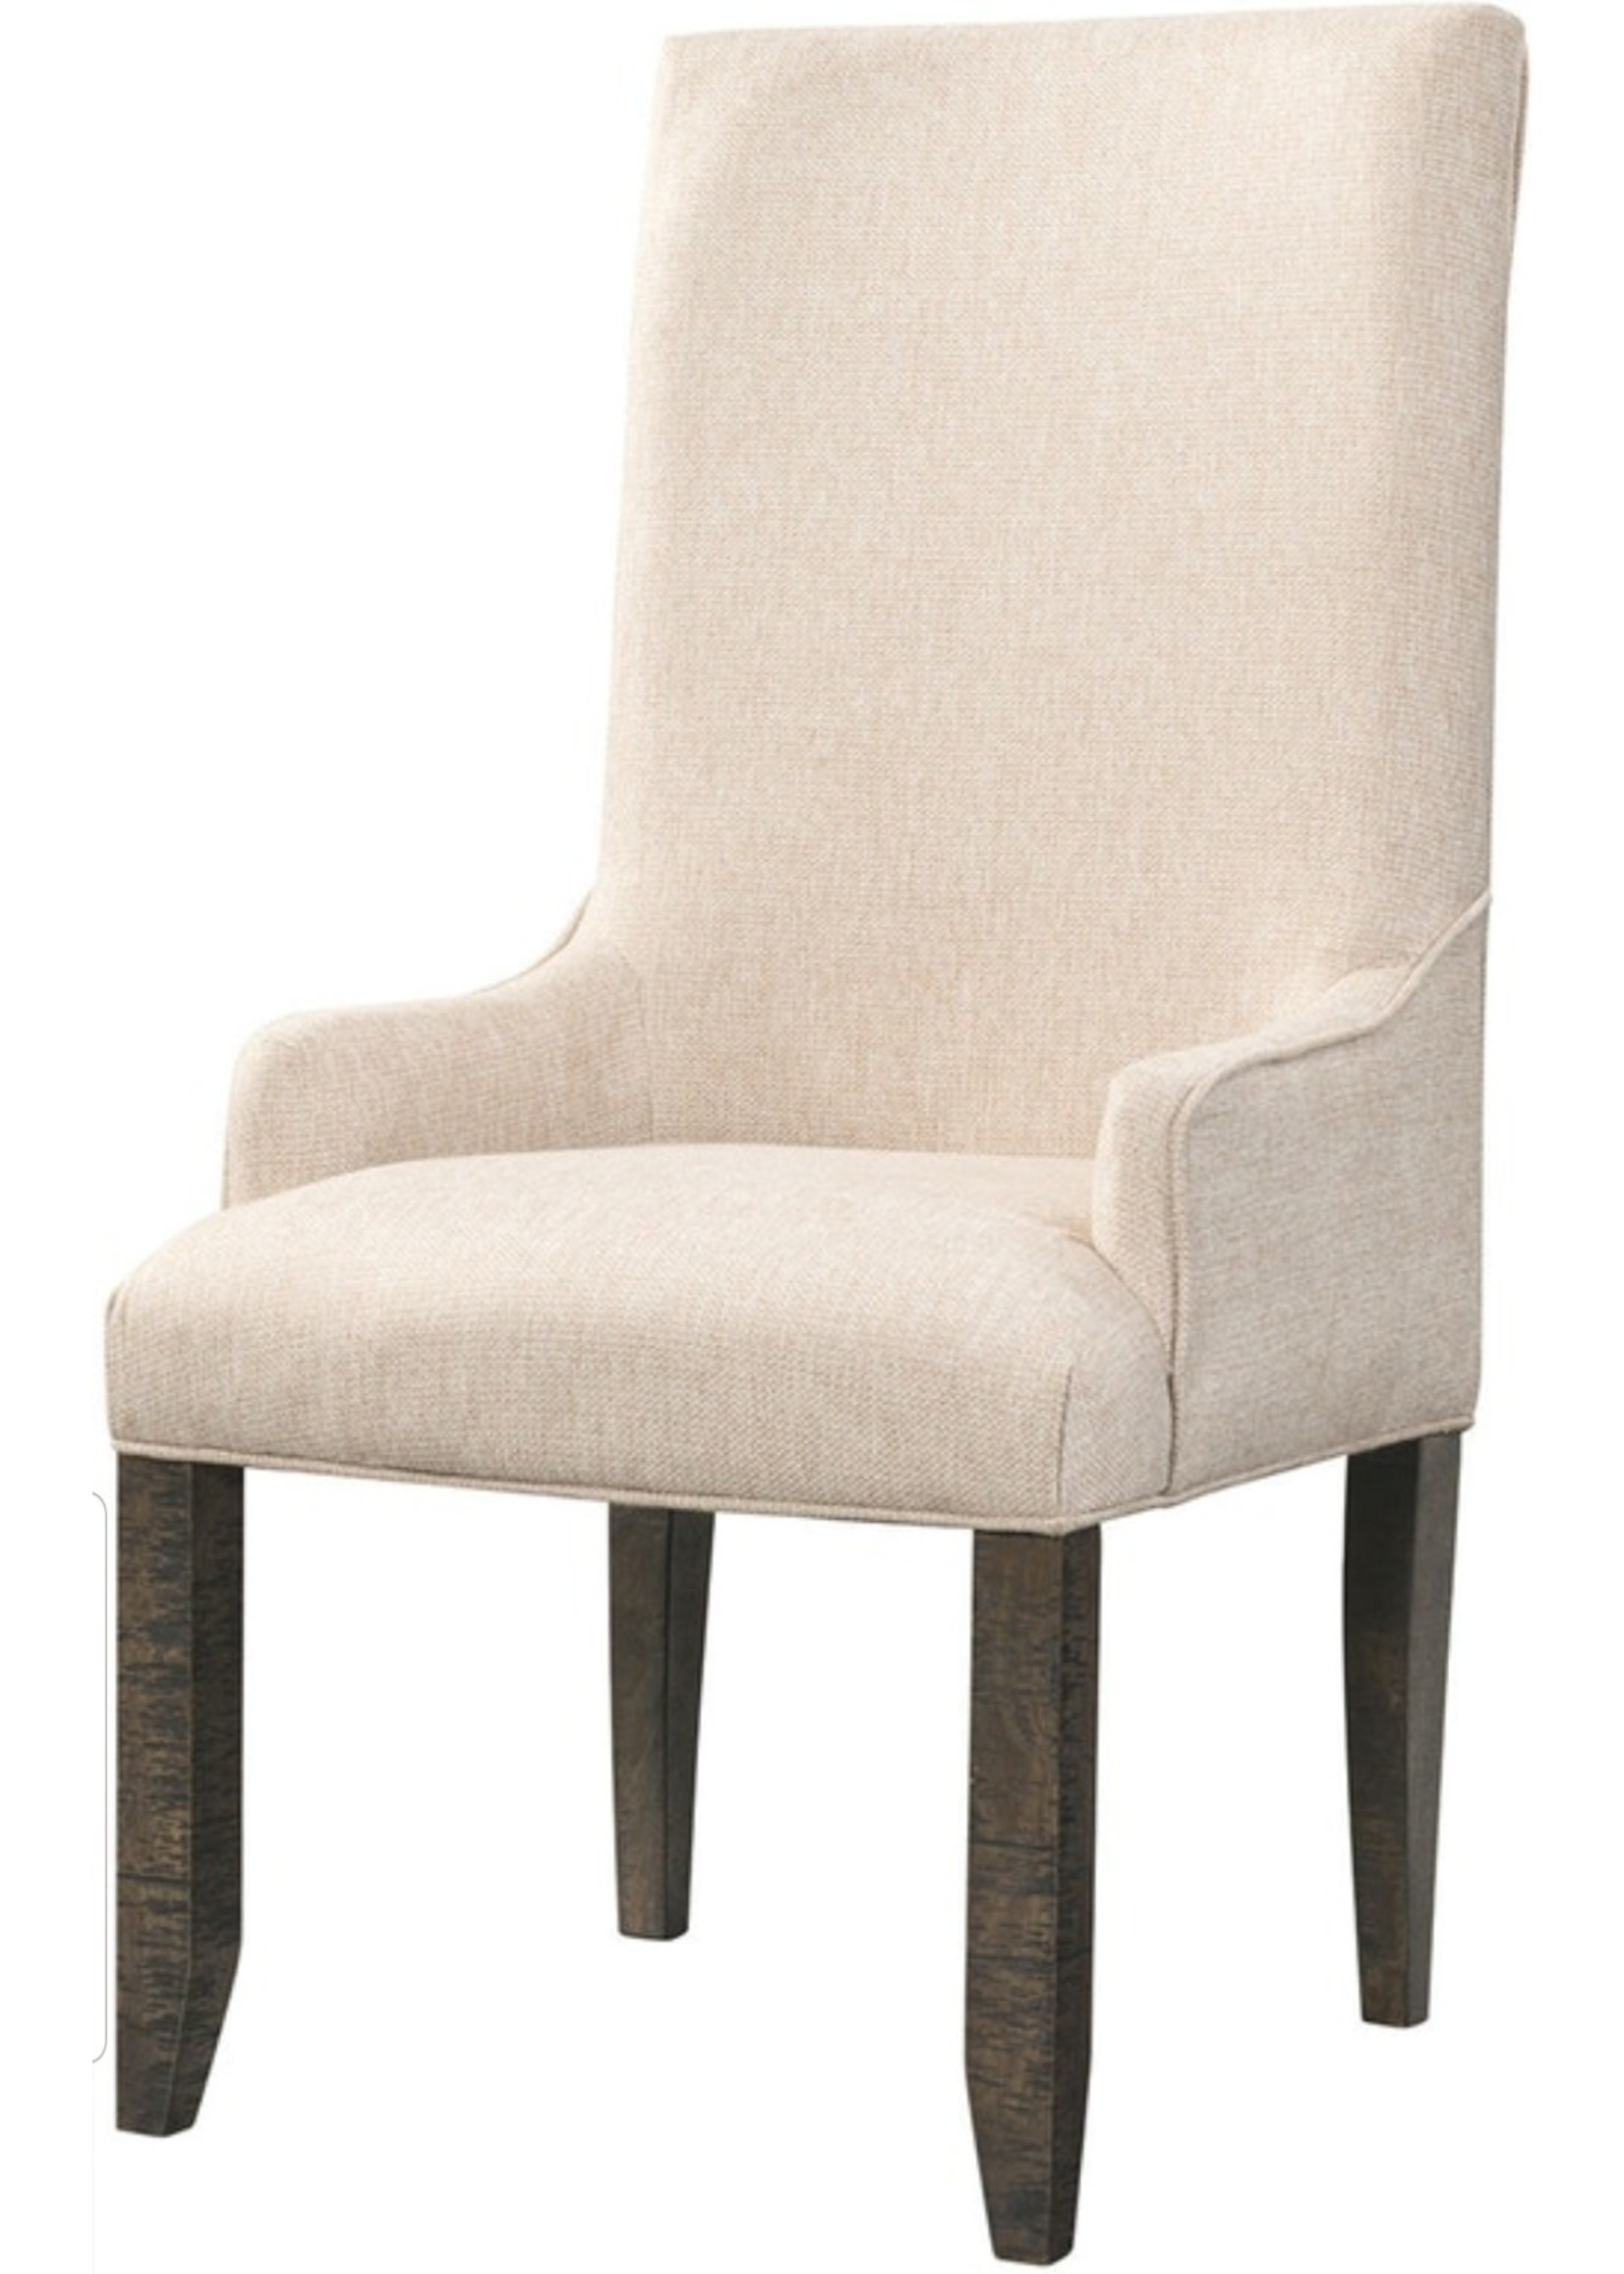 ELEMENTS DST100PC PARSON CHAIR UPHOLSTERED STONE